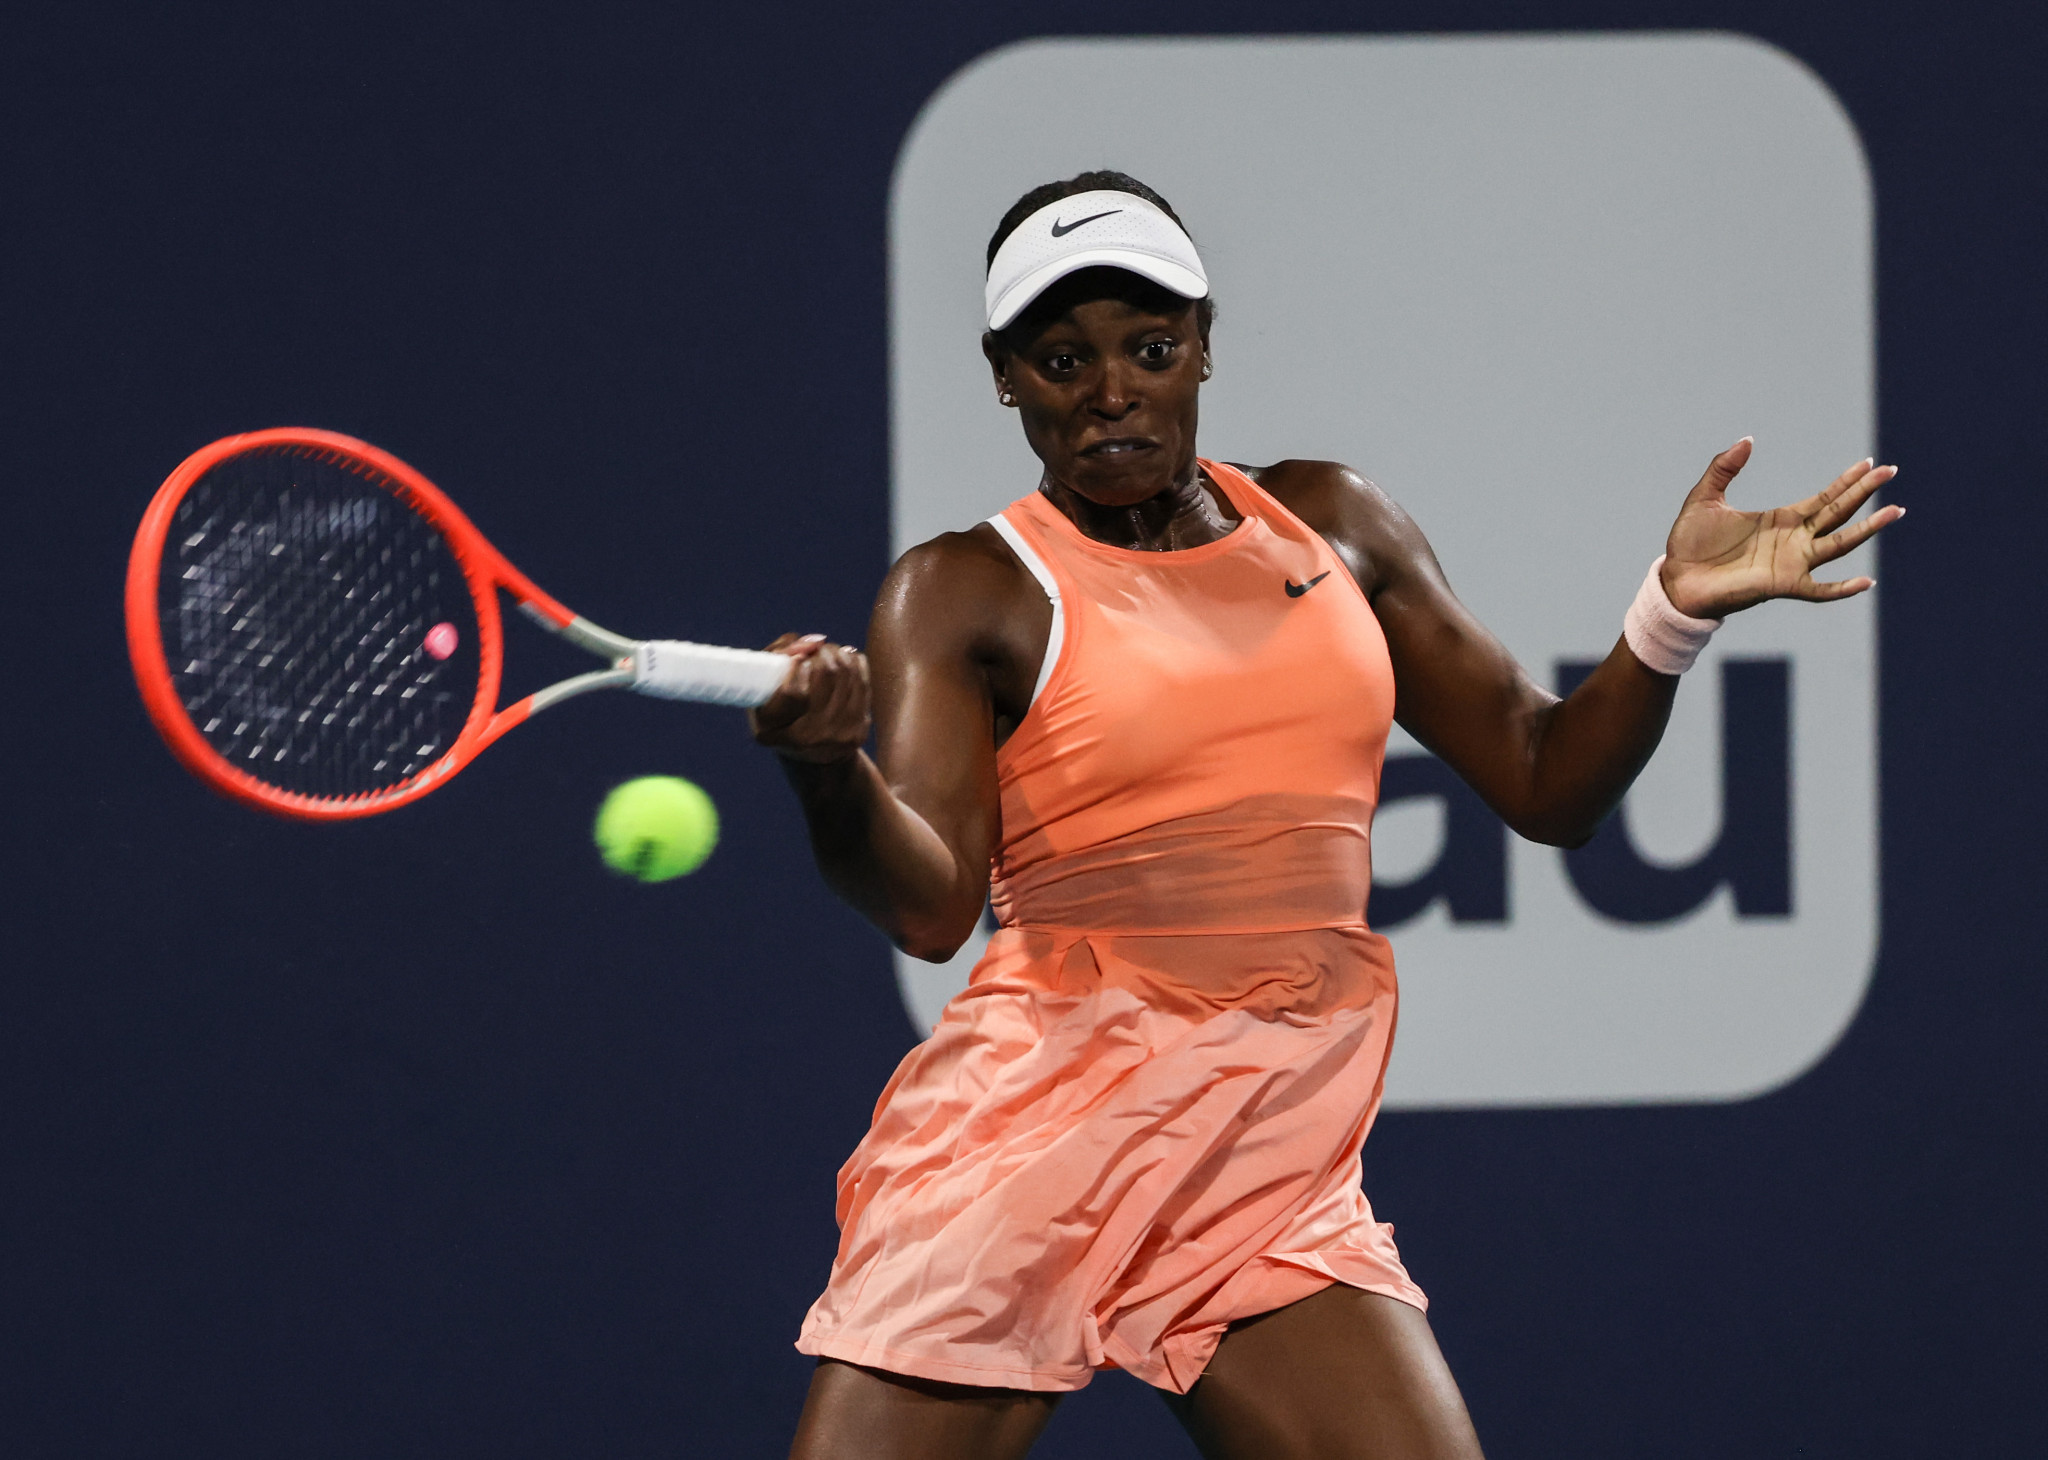 Stephens battles back to seal first win of 2021 at Miami Open, angry Pospisil out